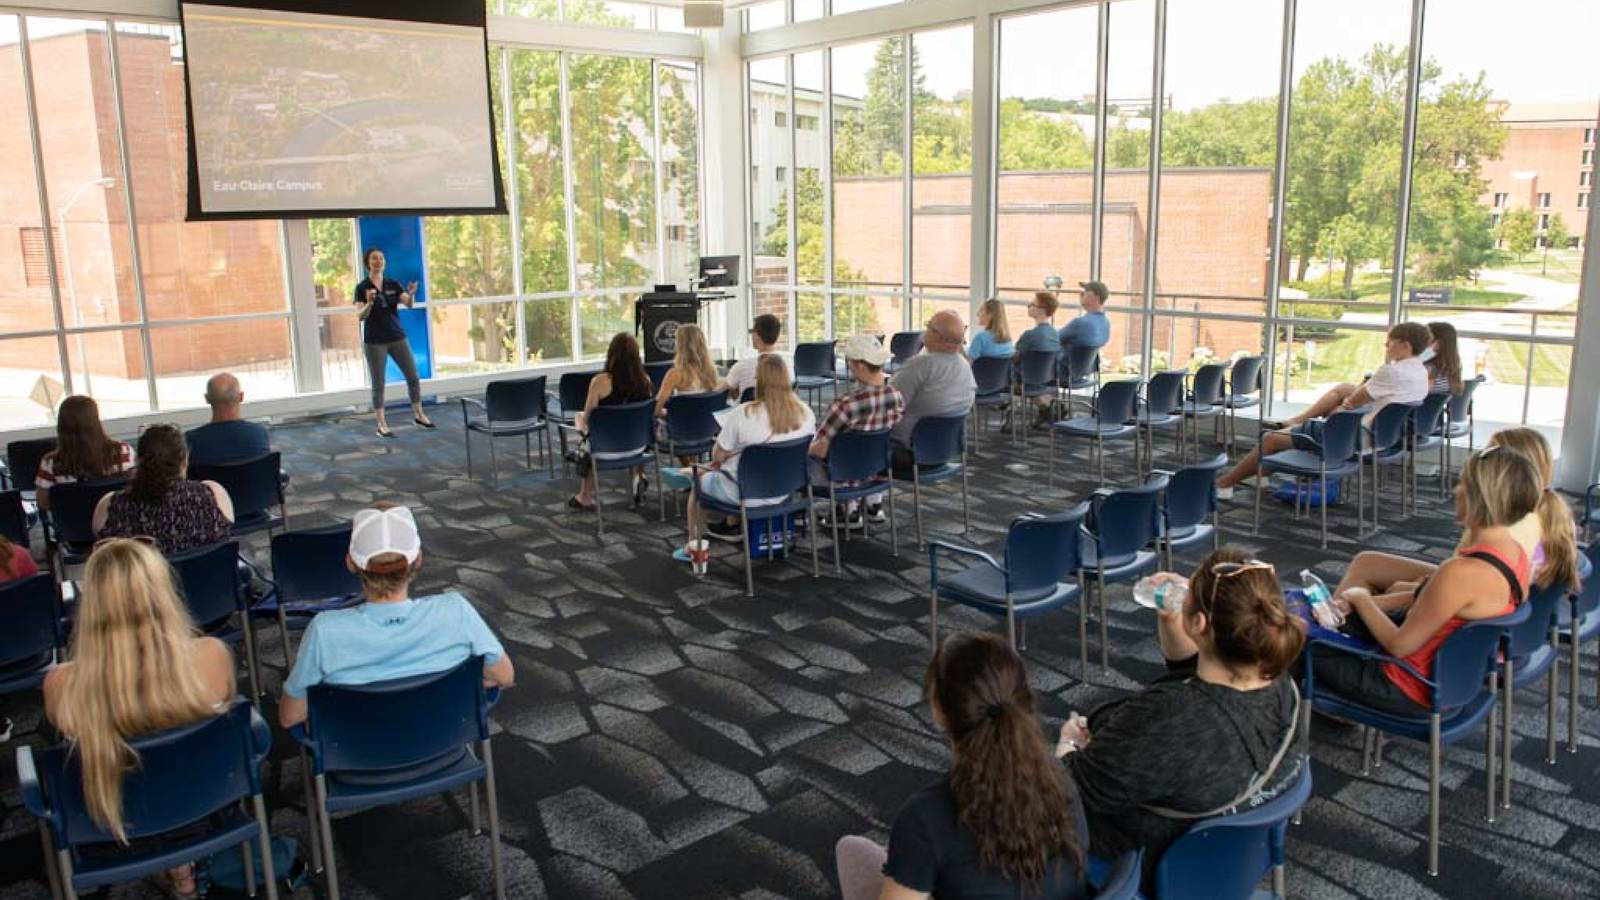 Prospective students and their families enjoy the start to their Admissions visits with a presentation followed by a 90-minute campus tour led by a current student.